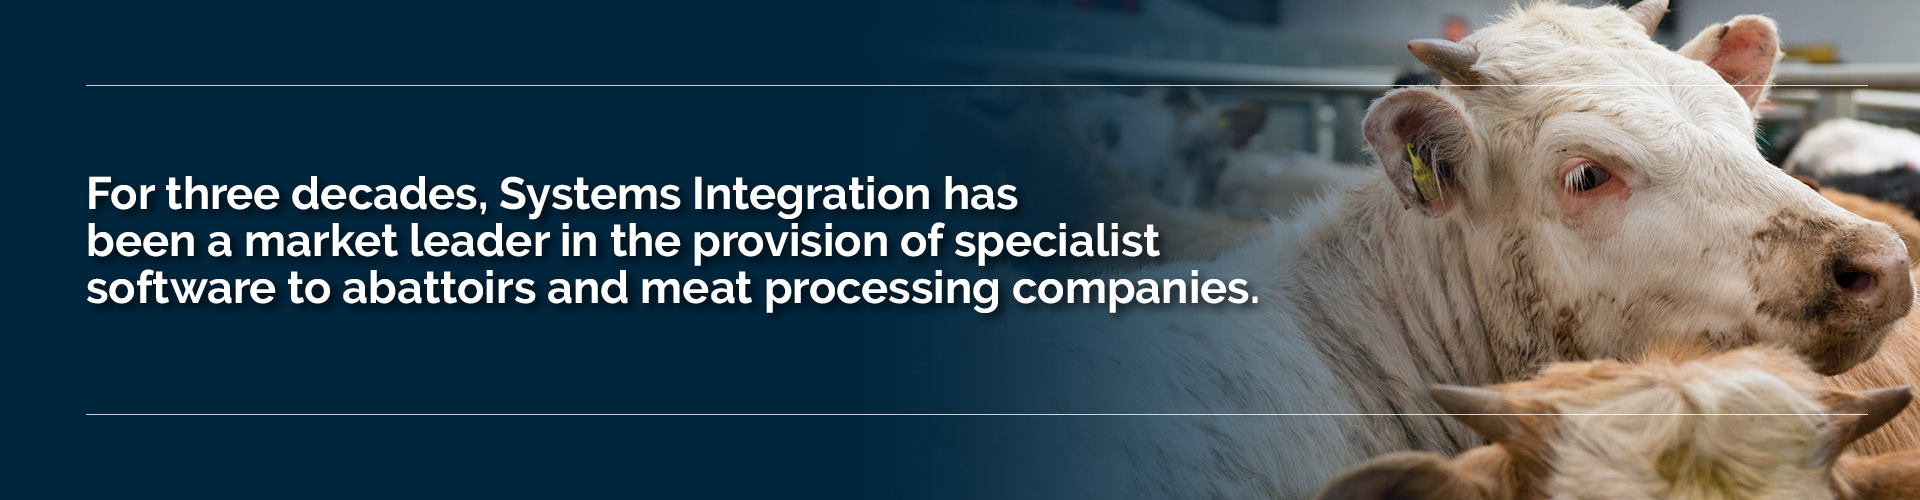 For three decades Systems Integration has been market leader for abattoir and meat processing software